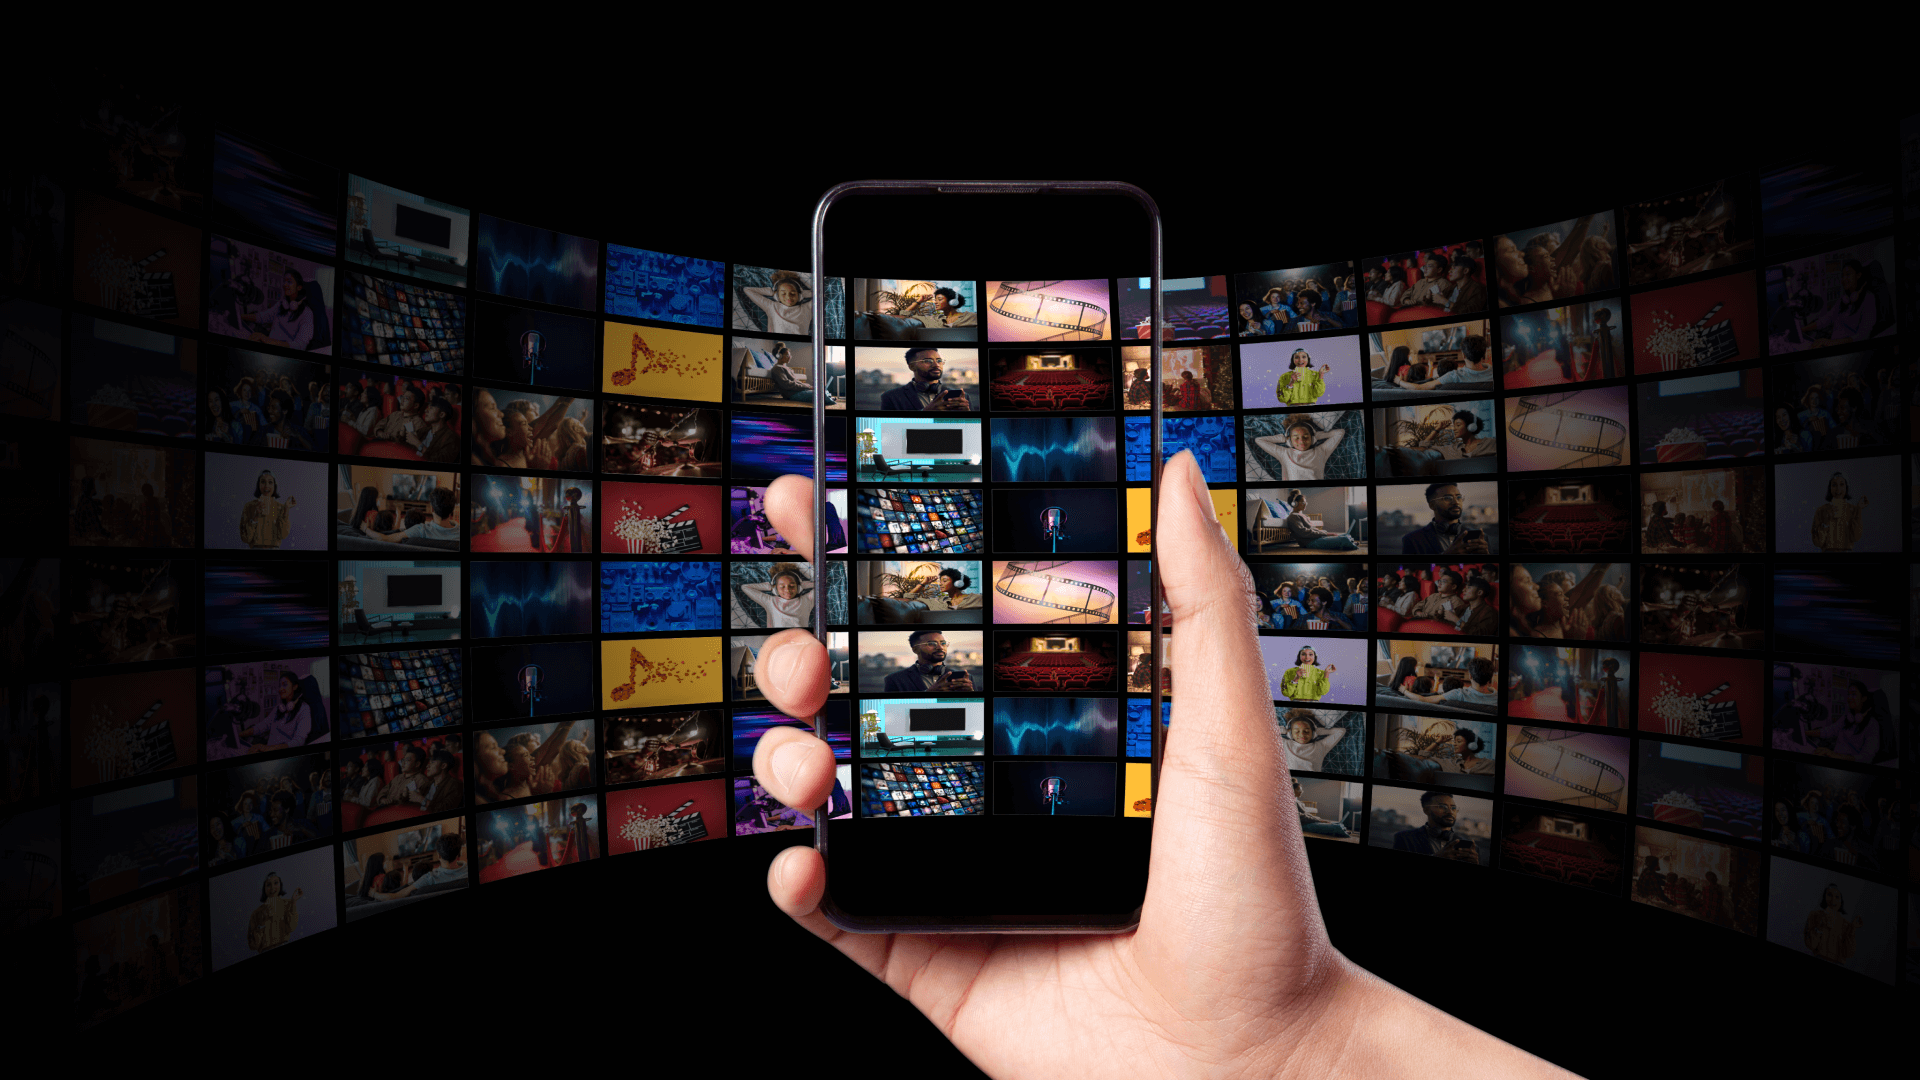 Companies should understand the big media and entertainment industry trends to succeed in 2023, growing their revenues, and avoid falling behind their competitors.